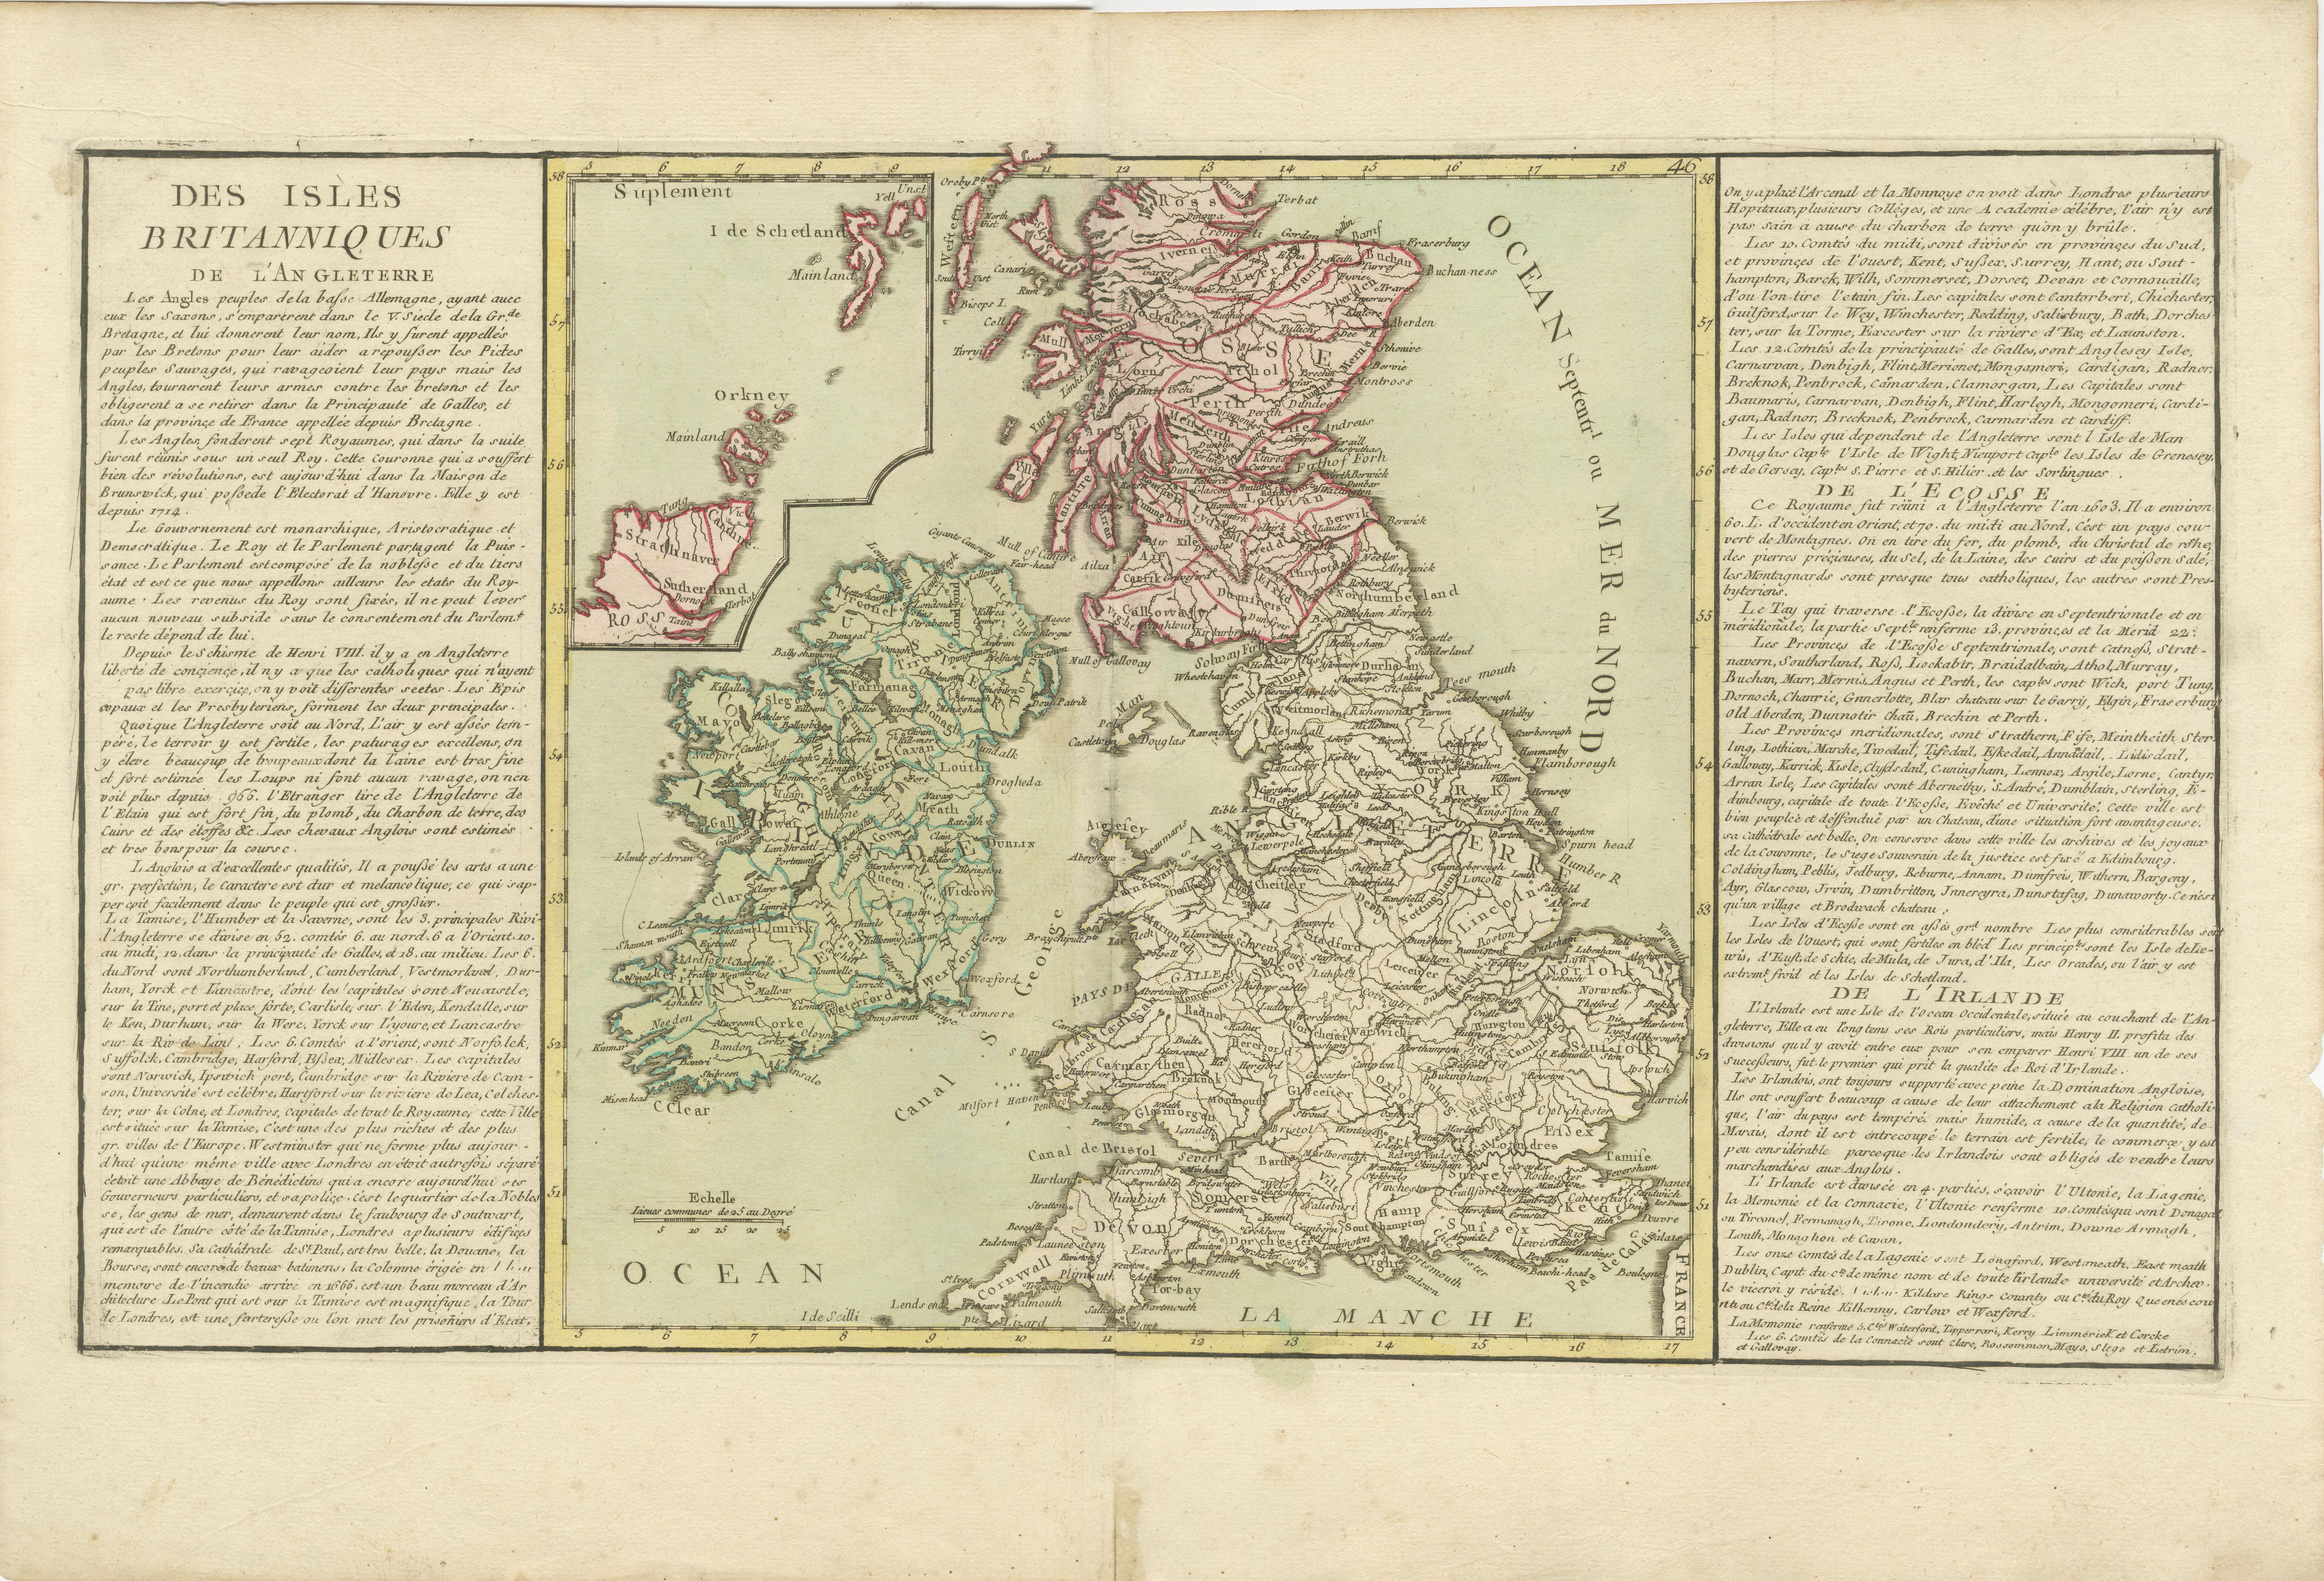 Antique map titled 'Des Isles Britanniques'. Original antique map of the British isles. This map is divided in to three major regions of the 18th century United Kingdom: England, Ireland, and Scotland. It is color coded and thoroughly labeled with